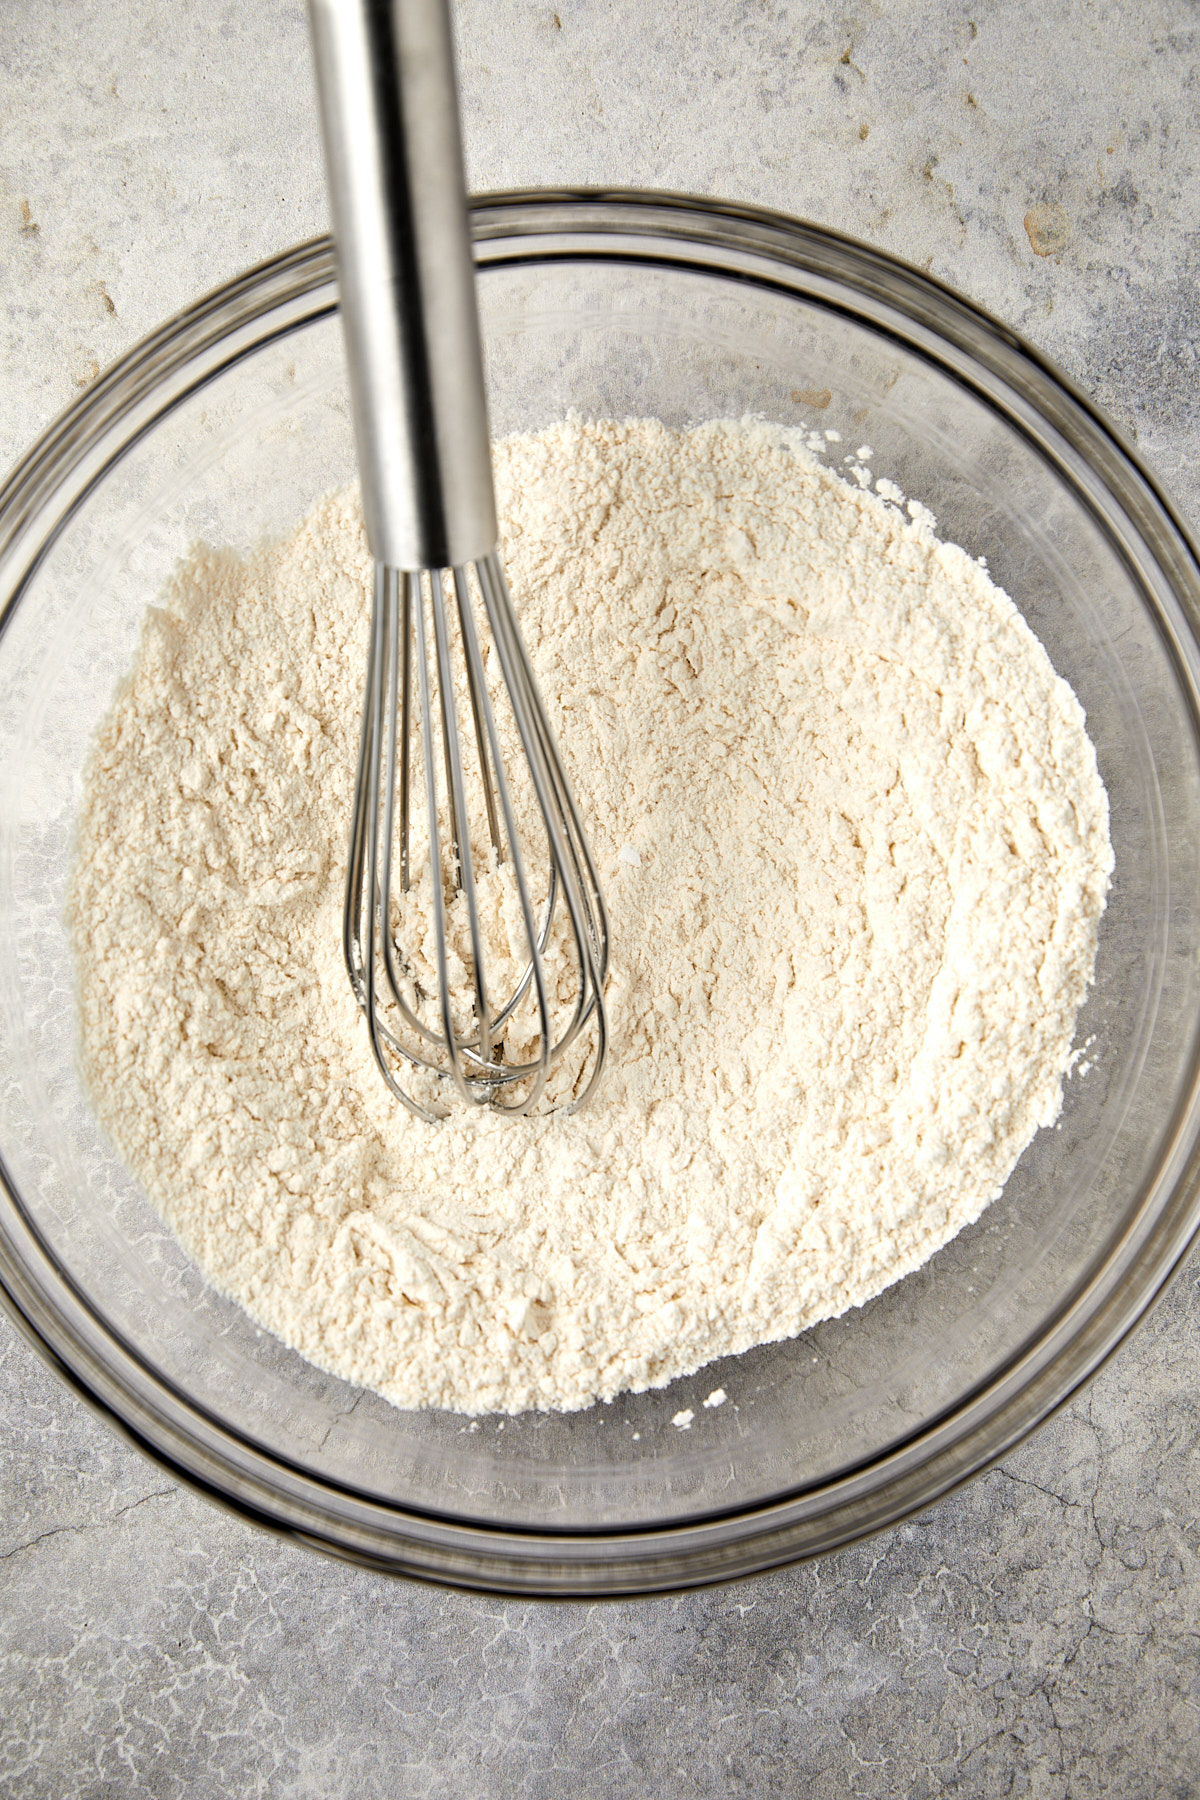 The image displays a clear glass mixing bowl on a gray surface, containing flour, baking powder, baking soda, and salt with a whisk. 